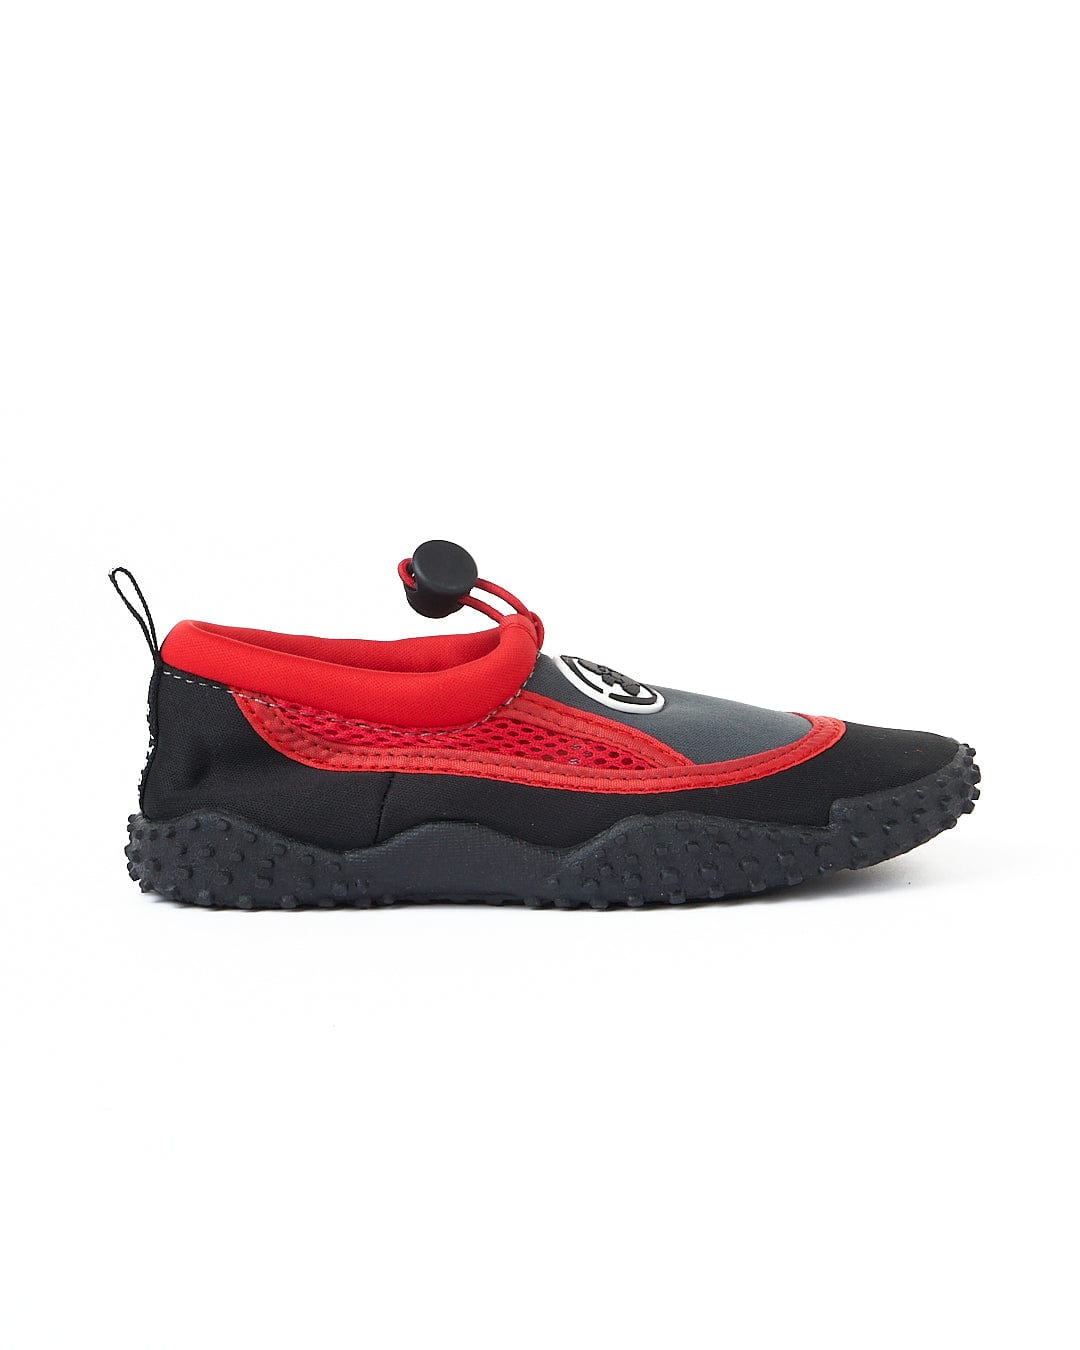 A pair of Tok - Kids Aqua Shoes - Red by Saltrock on a white background.